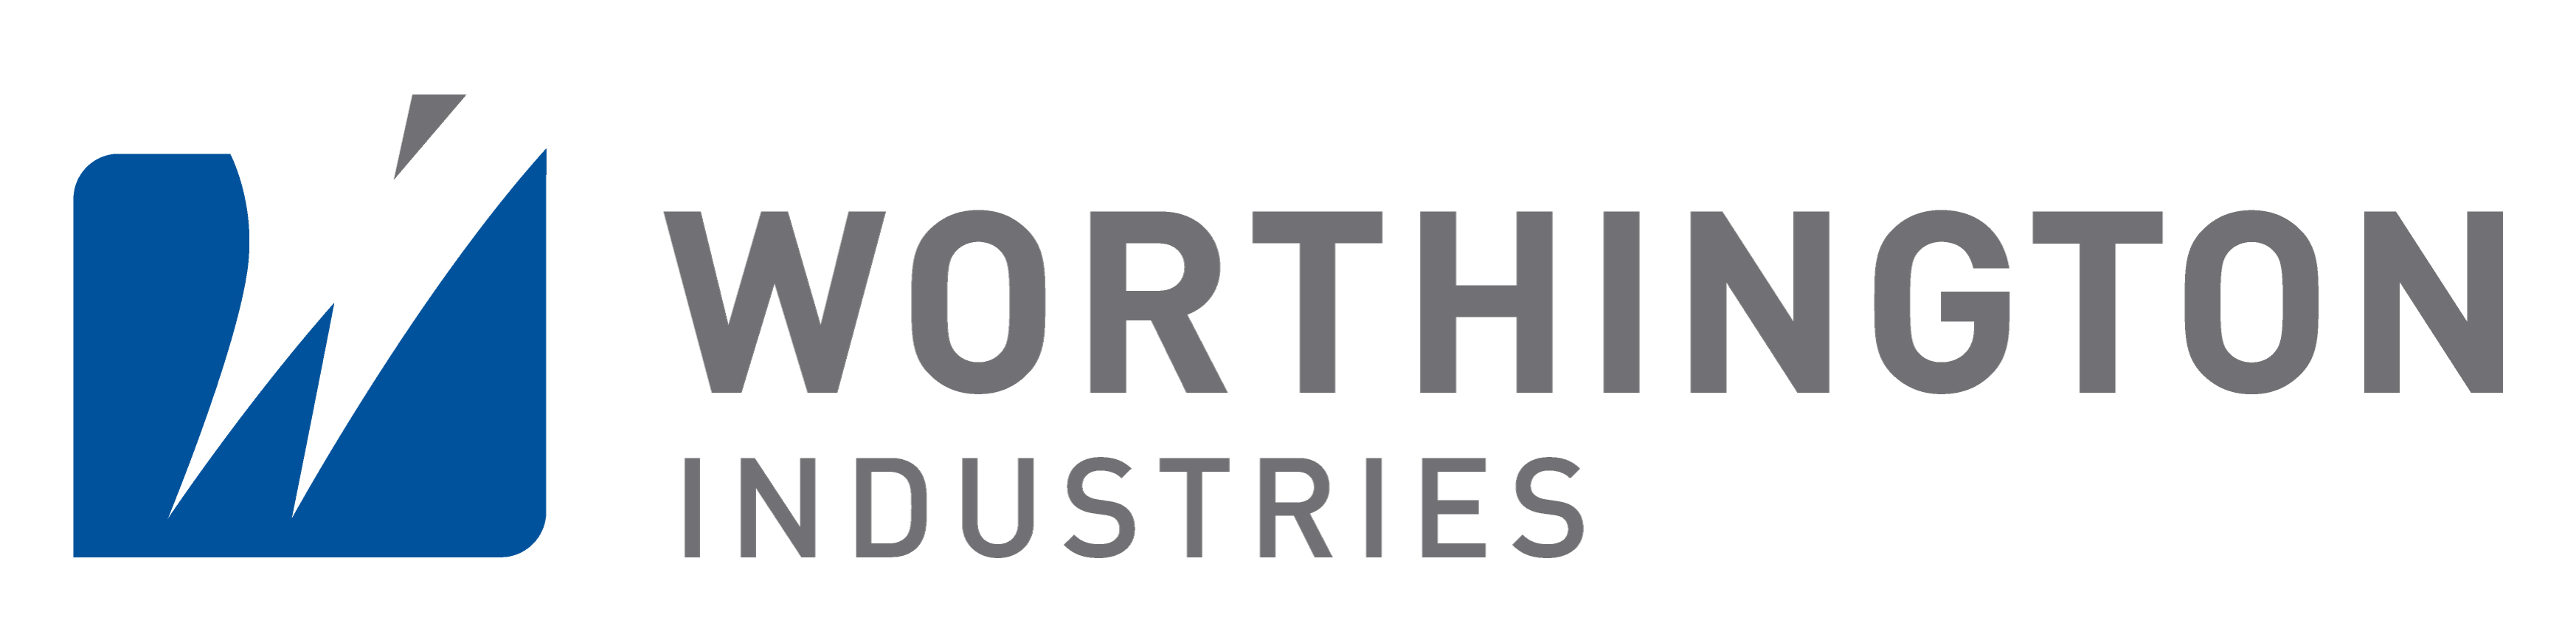 Worthington Industries Reveals New Company Identities Ahead of Anticipated December Separation; Announces 2023 Investor and Analyst Day